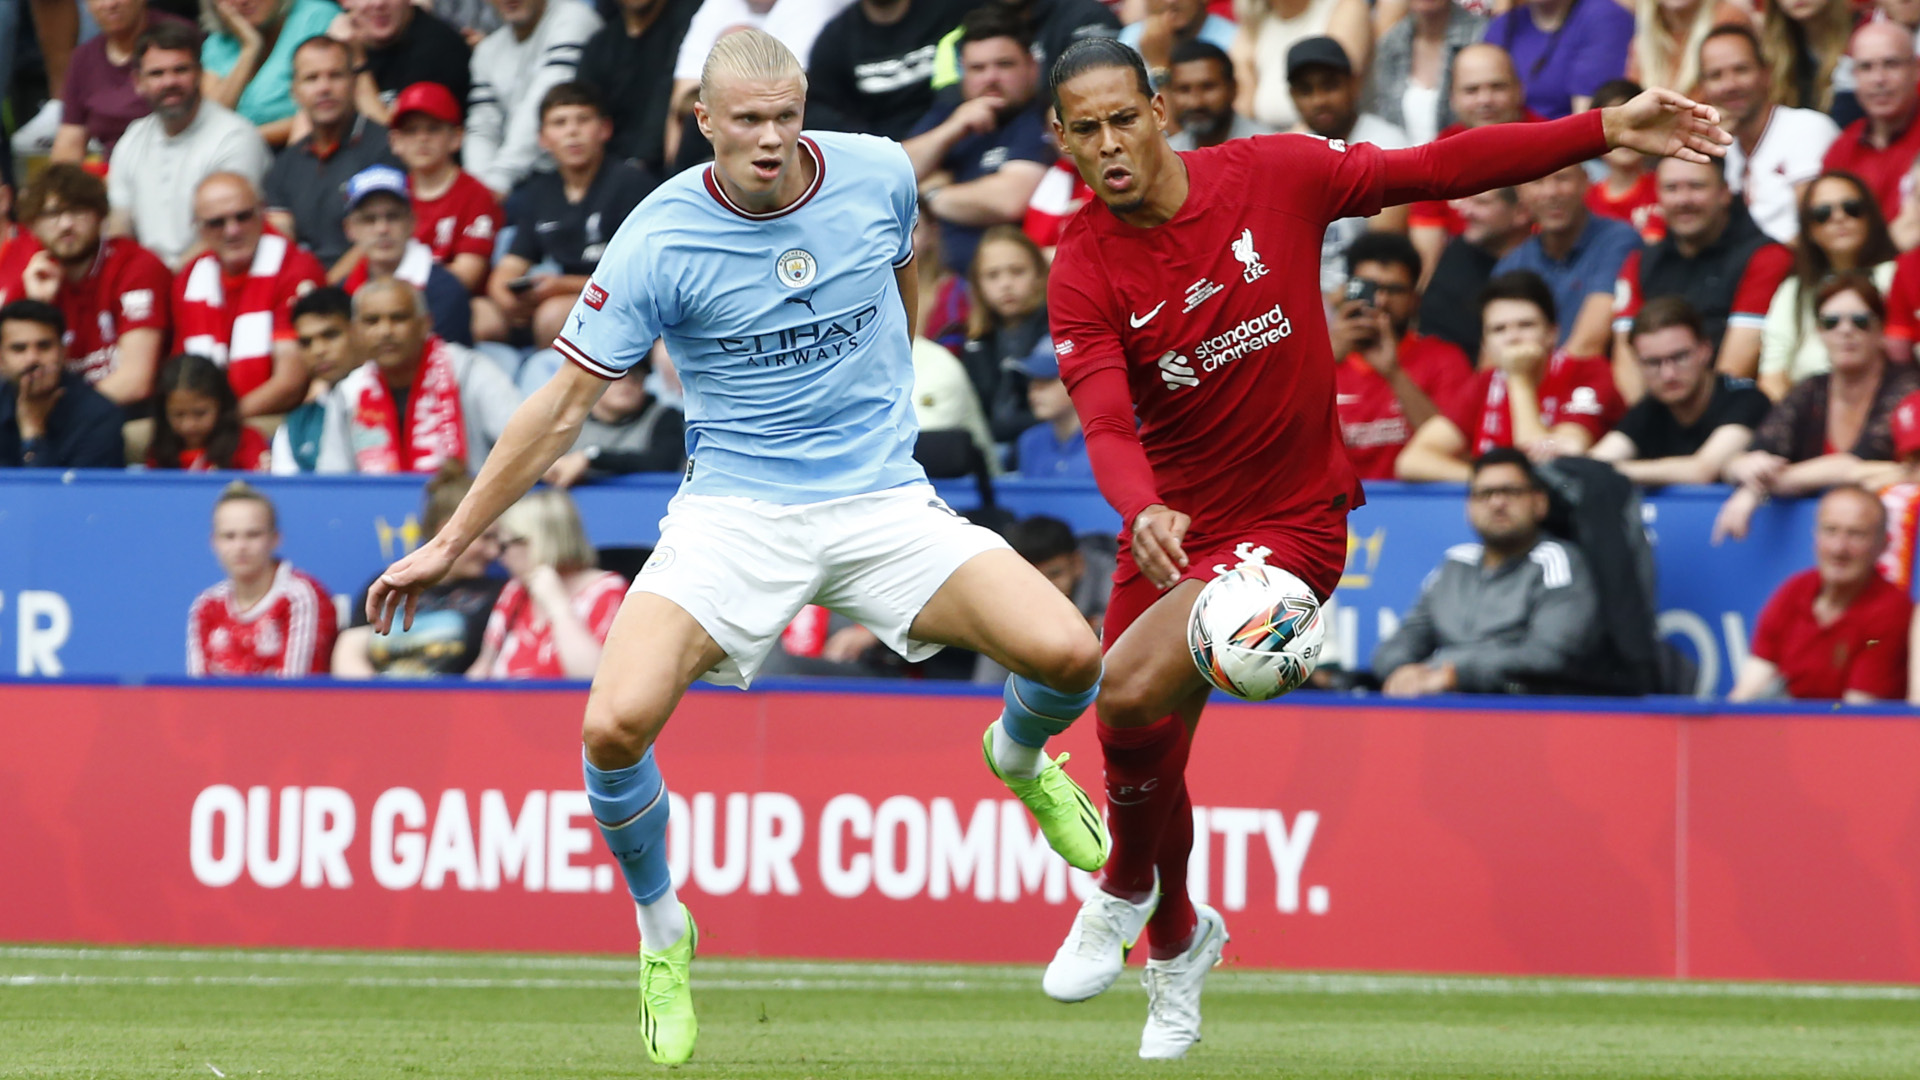 Liverpool vs Man City live stream how to watch the Premier League online and on TV from anywhere, team news TechRadar